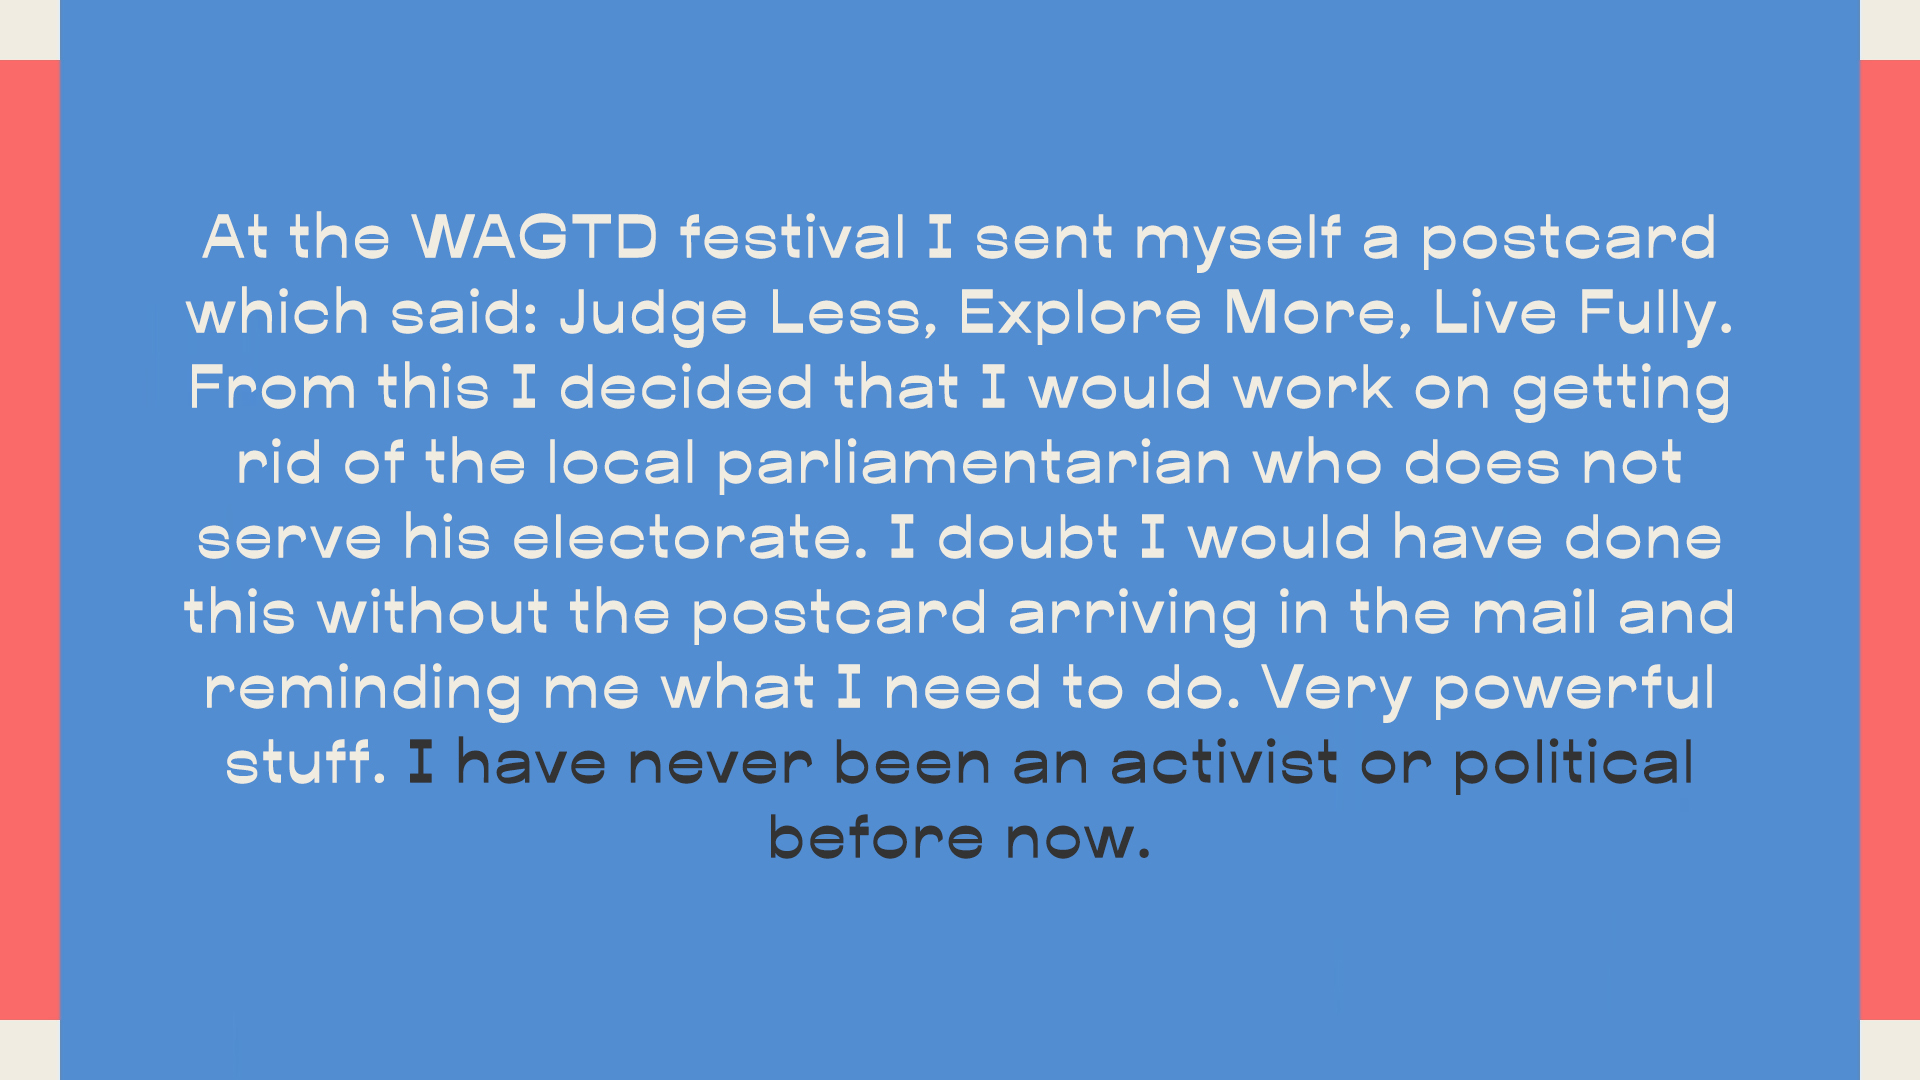 WAGTD-LIVE-MORE-SUBMISSION-6.jpg